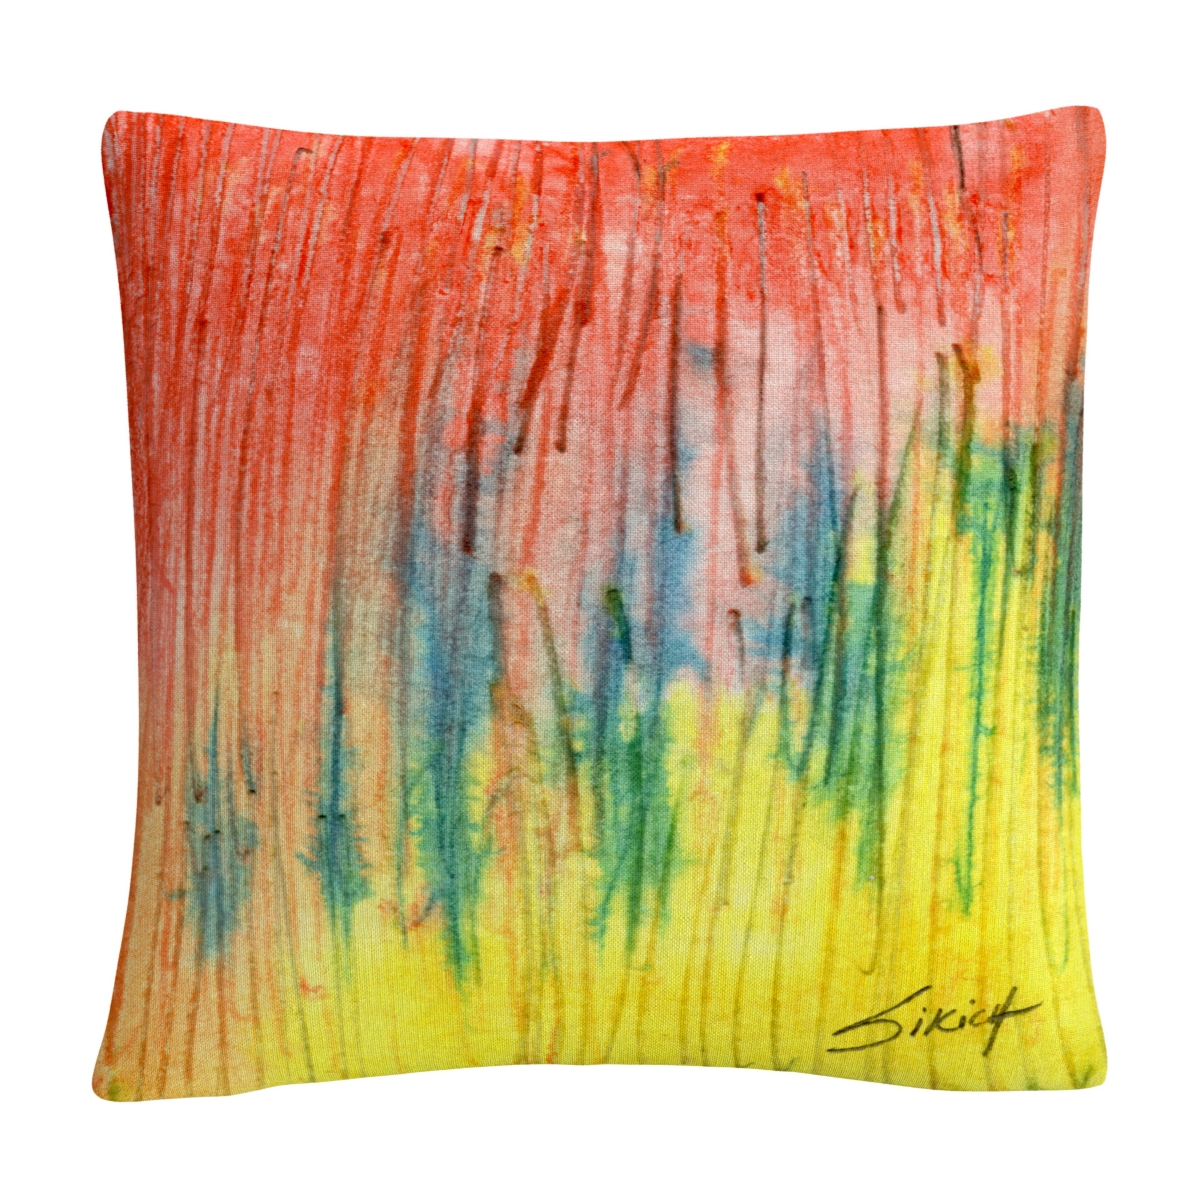 Anthony Sikich Zigs Zag Red Yellow Abstract Decorative Pillow, 16 x 16